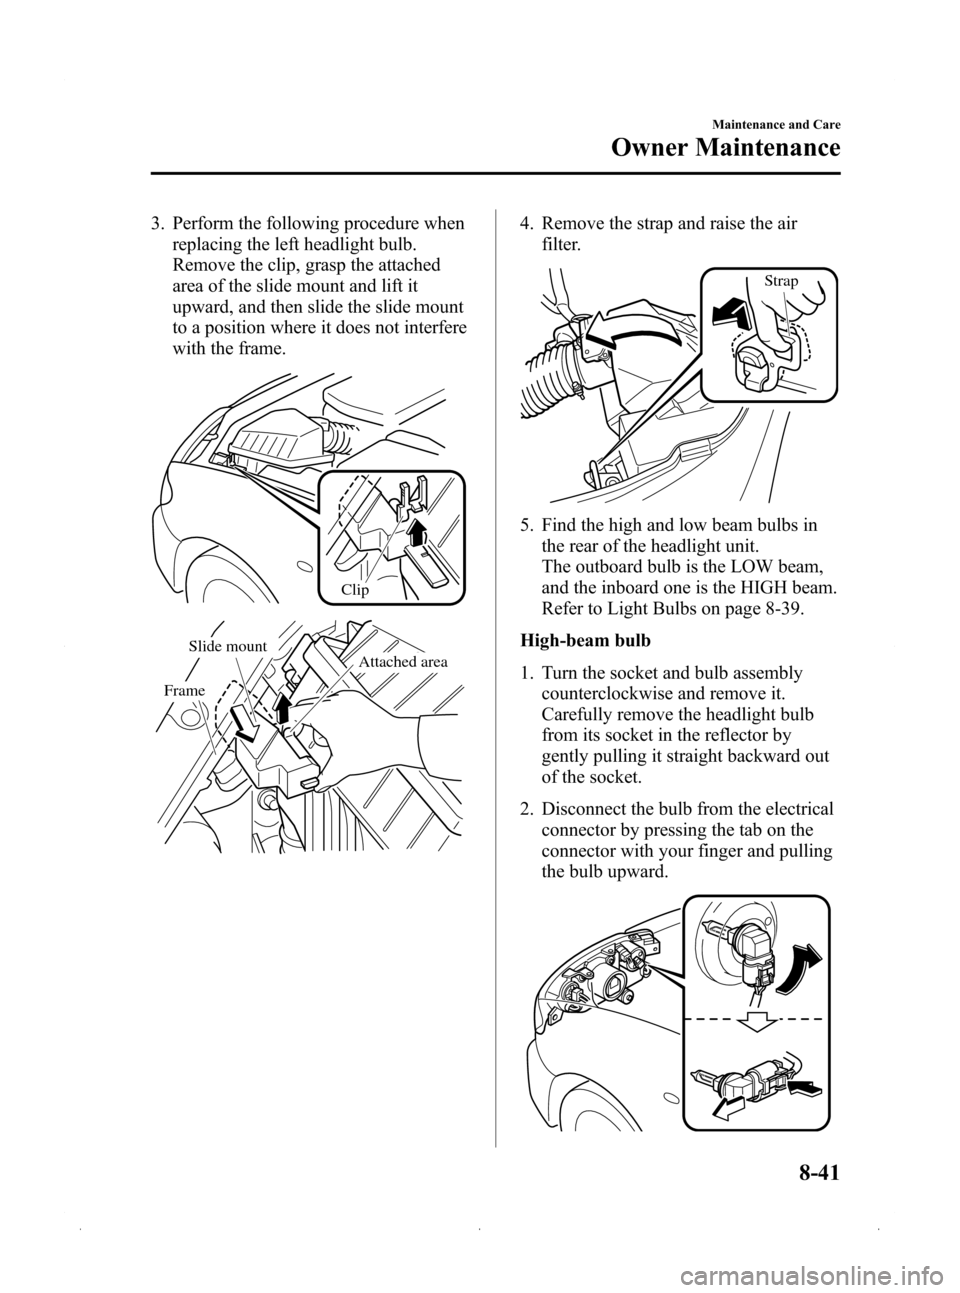 MAZDA MODEL 3 HATCHBACK 2009  Owners Manual (in English) Black plate (327,1)
3. Perform the following procedure whenreplacing the left headlight bulb.
Remove the clip, grasp the attached
area of the slide mount and lift it
upward, and then slide the slide m